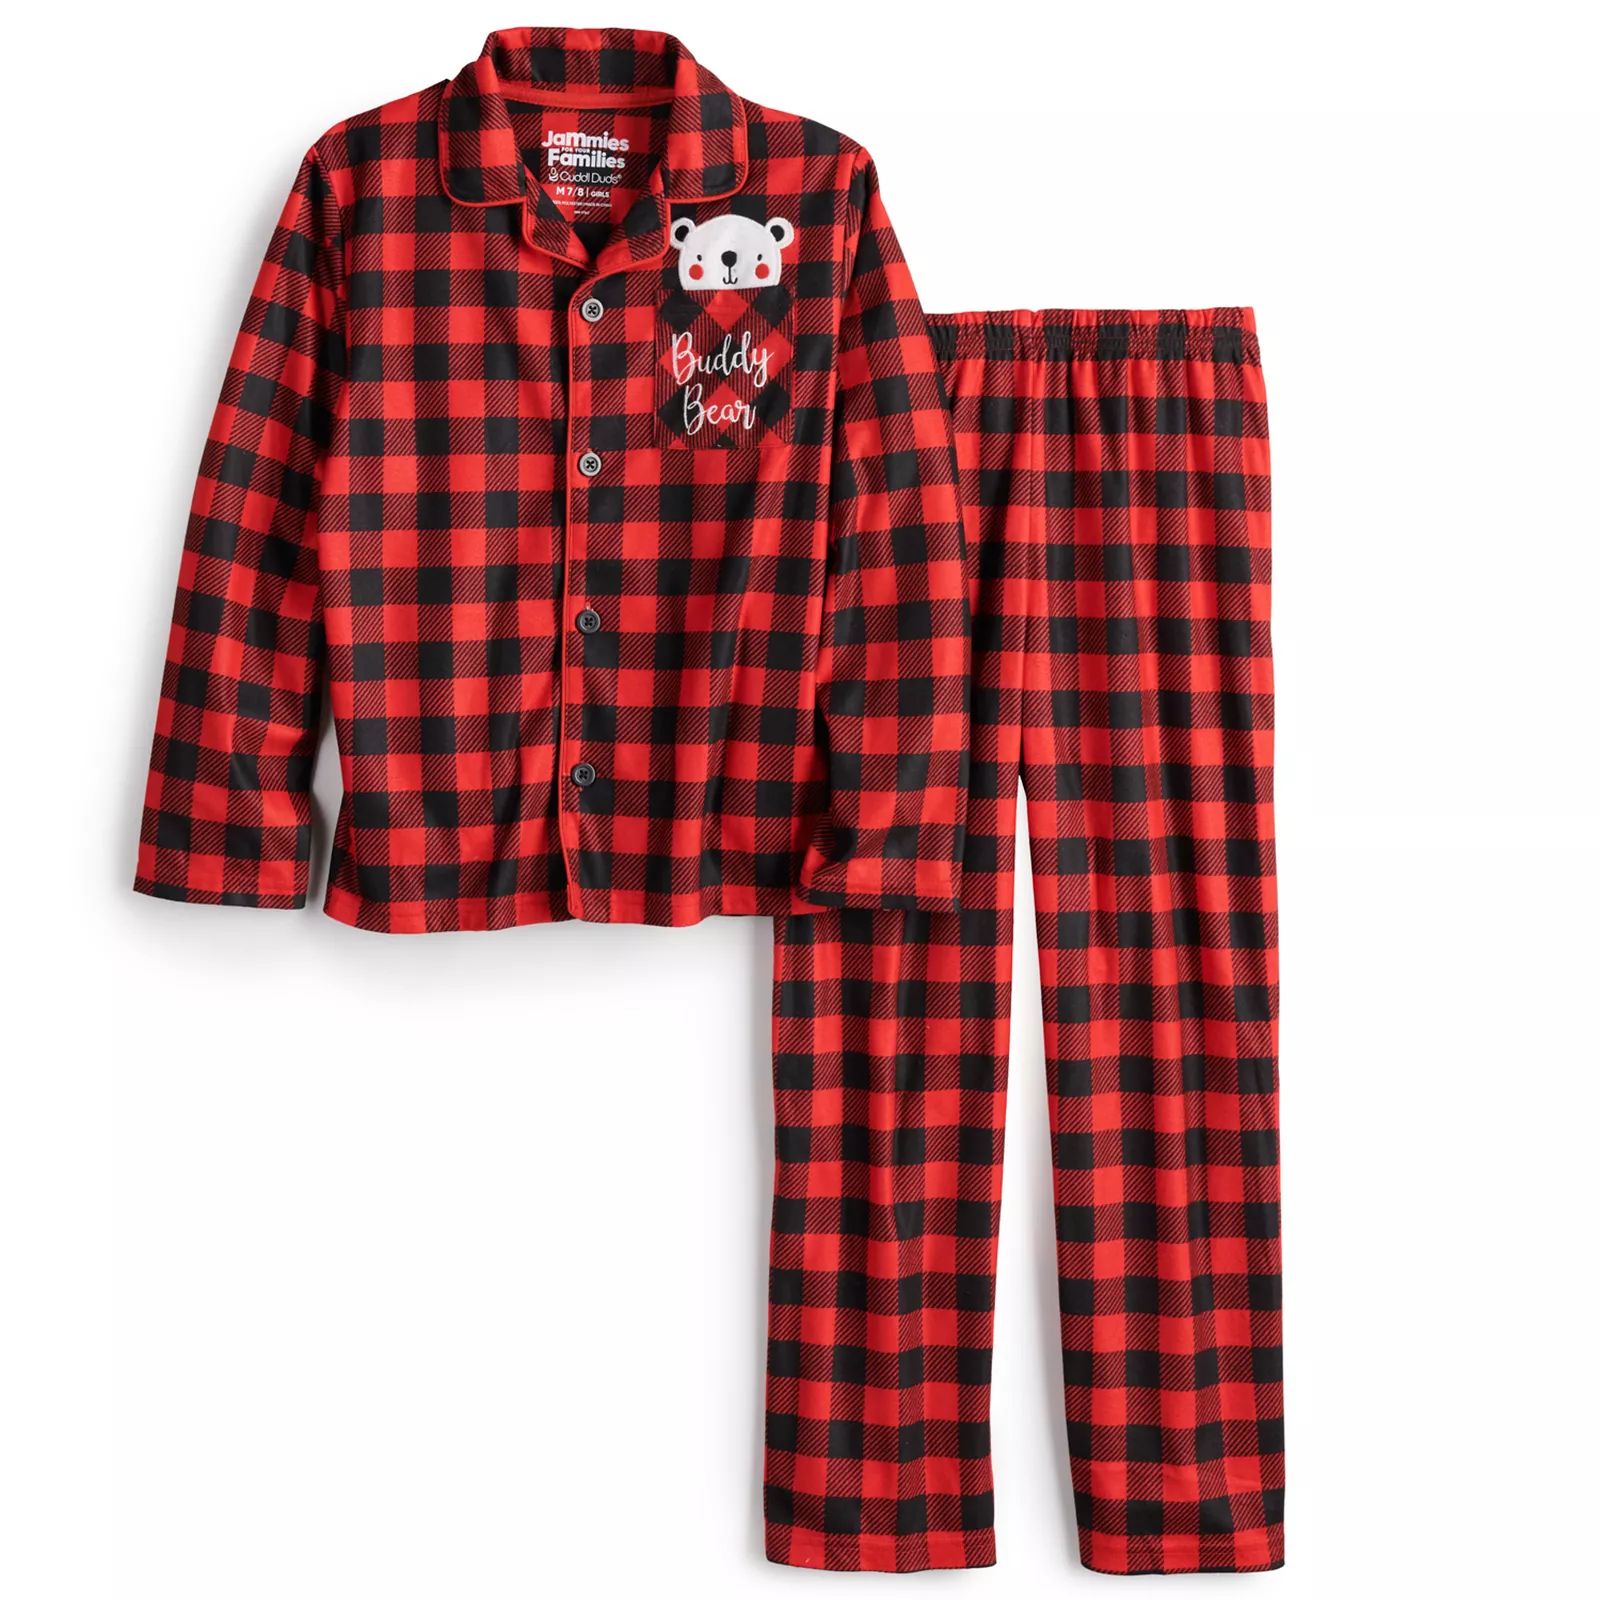 Kids 4-14 Jammies For Your Families Cool Bear Plaid Top & Pants Pajama Set by Cuddl Duds, Boy's, Brt | Kohl's